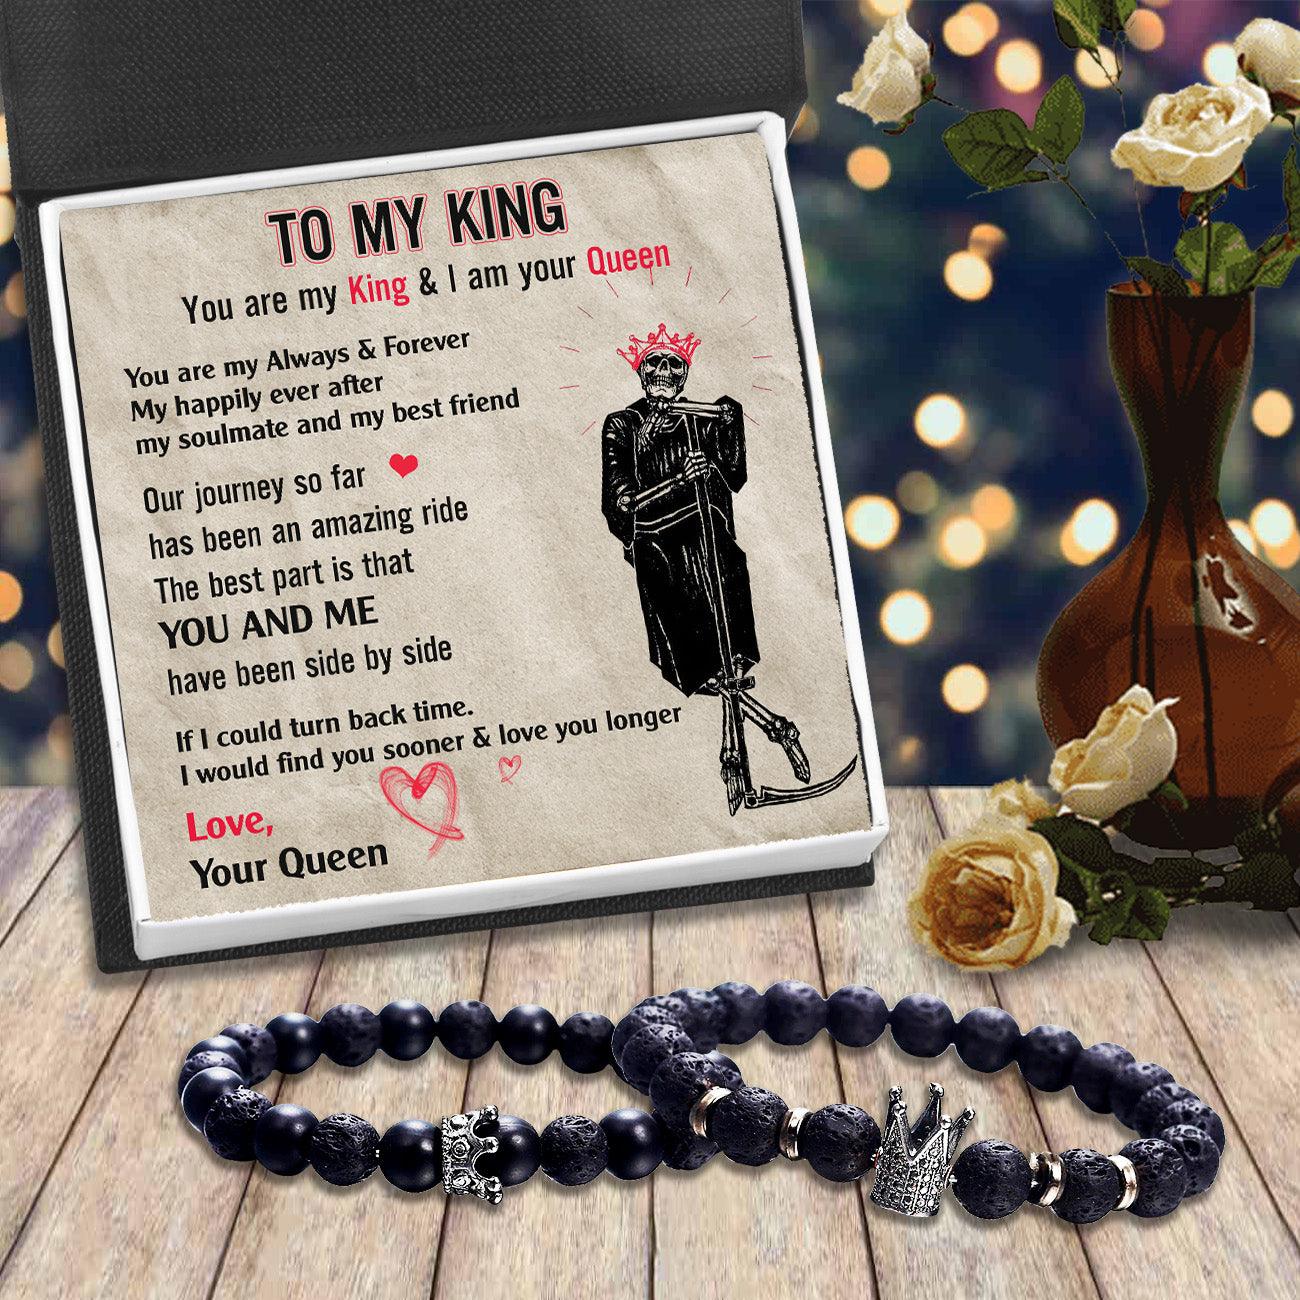 King & Queen Couple Bracelets - Skull - To My Man - Love, Your Queen - Augbae26009 - Gifts Holder